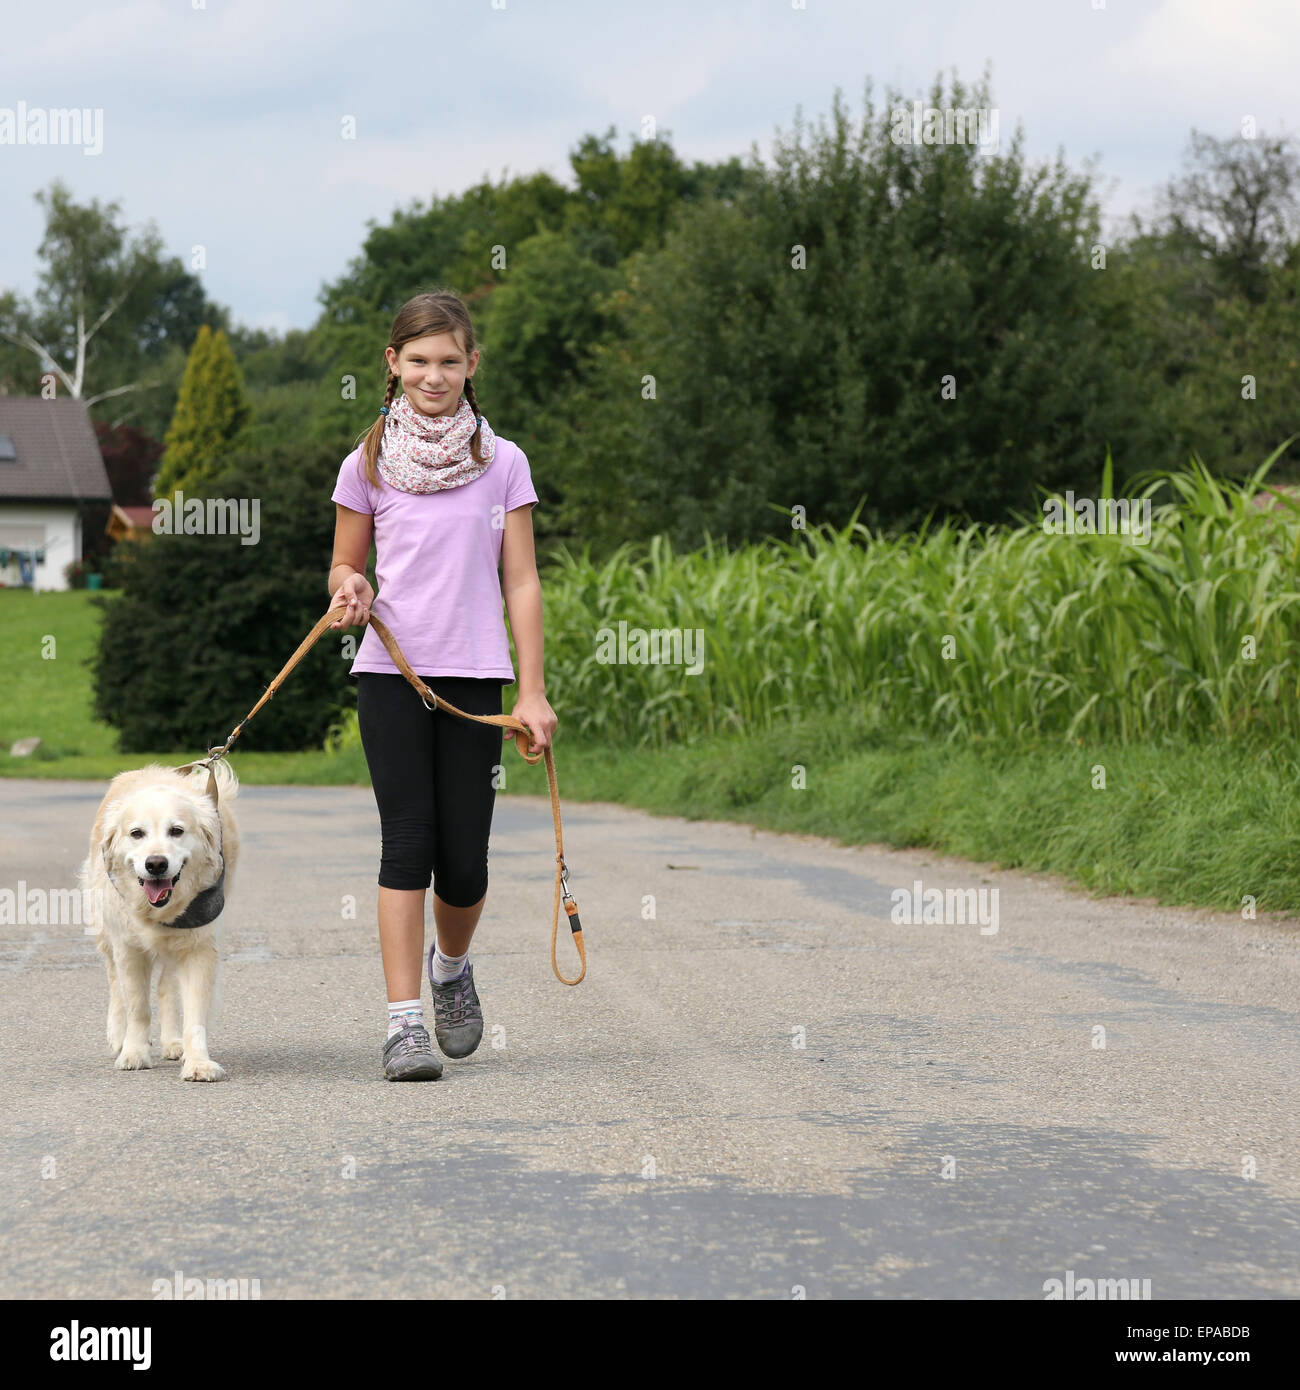 Gassi High Resolution Stock Photography and Images - Alamy